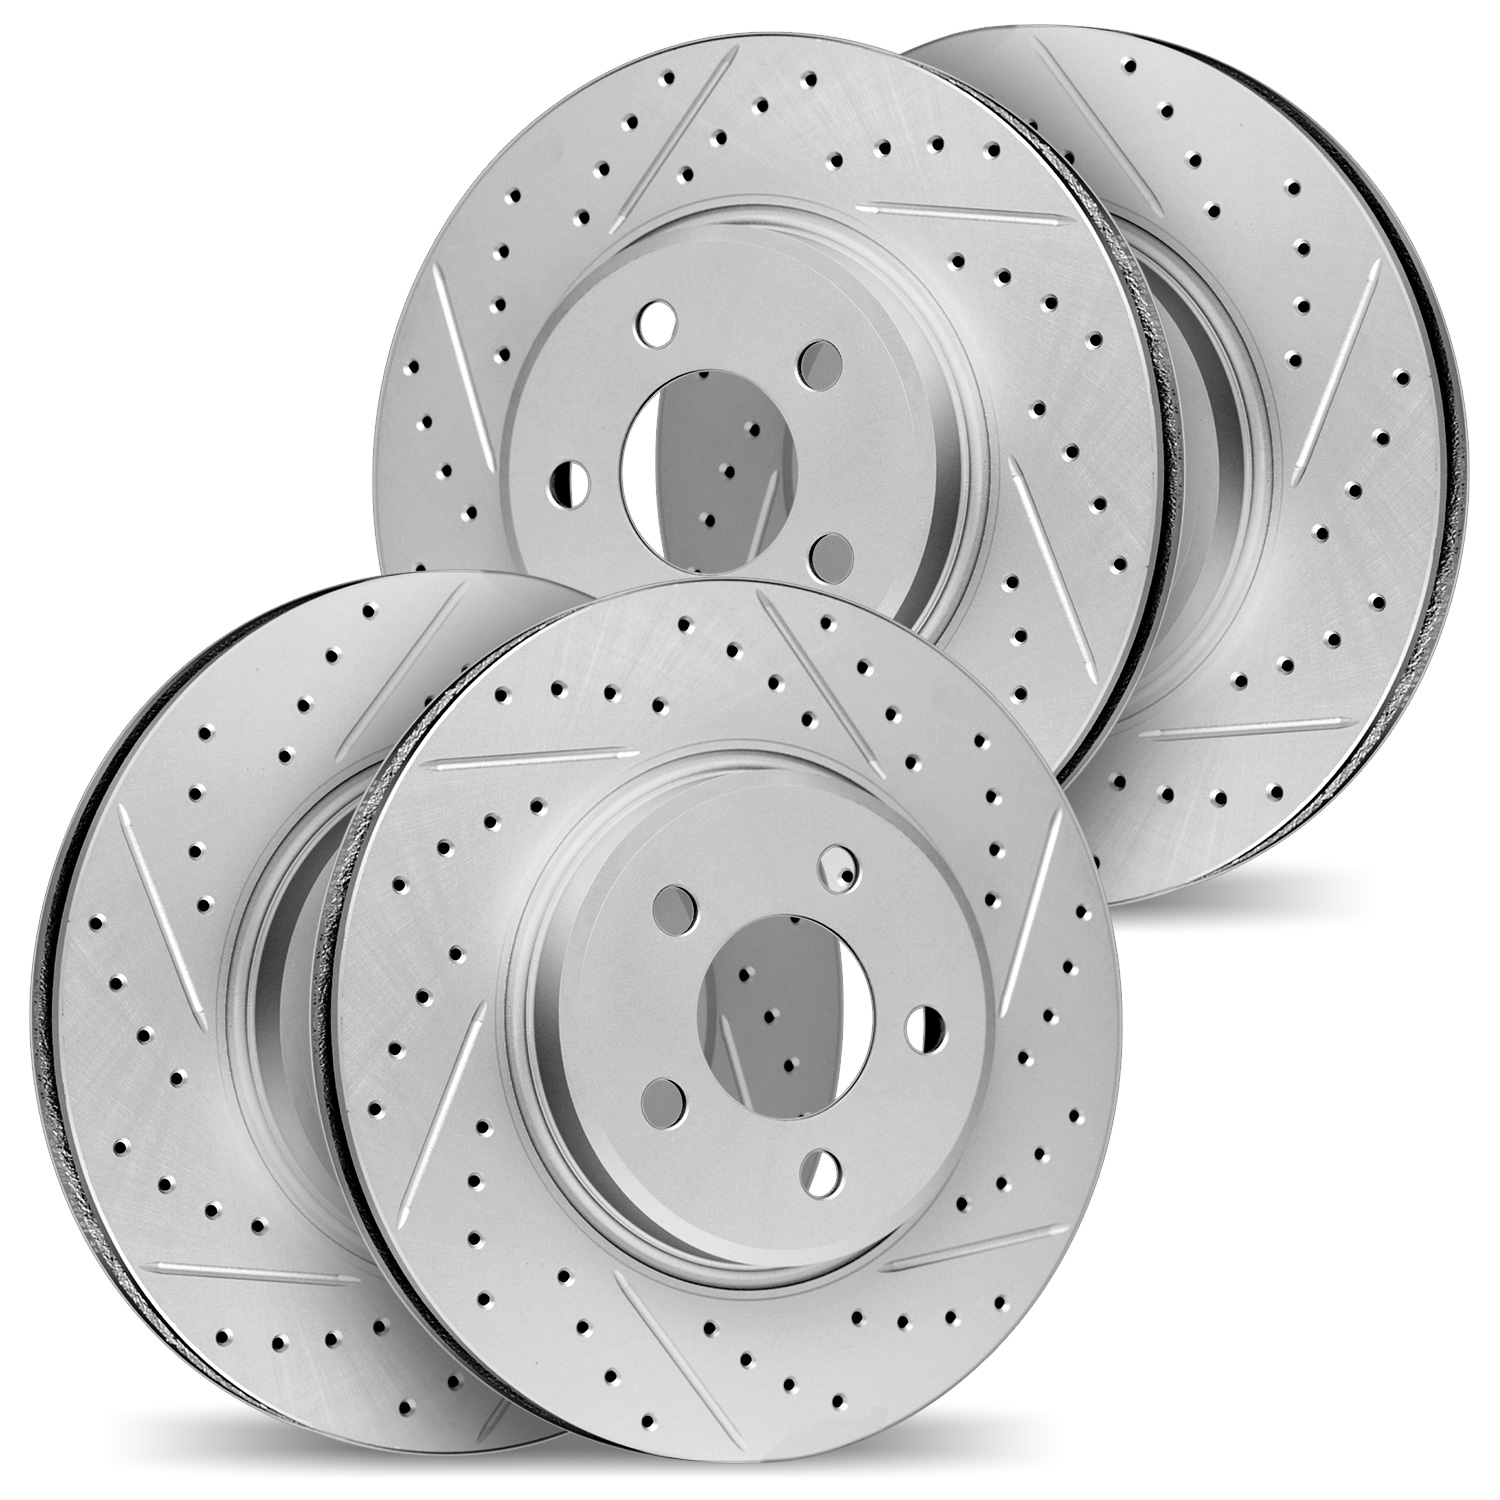 2004-13034 Geoperformance Drilled/Slotted Brake Rotors, 2010-2014 Subaru, Position: Front and Rear